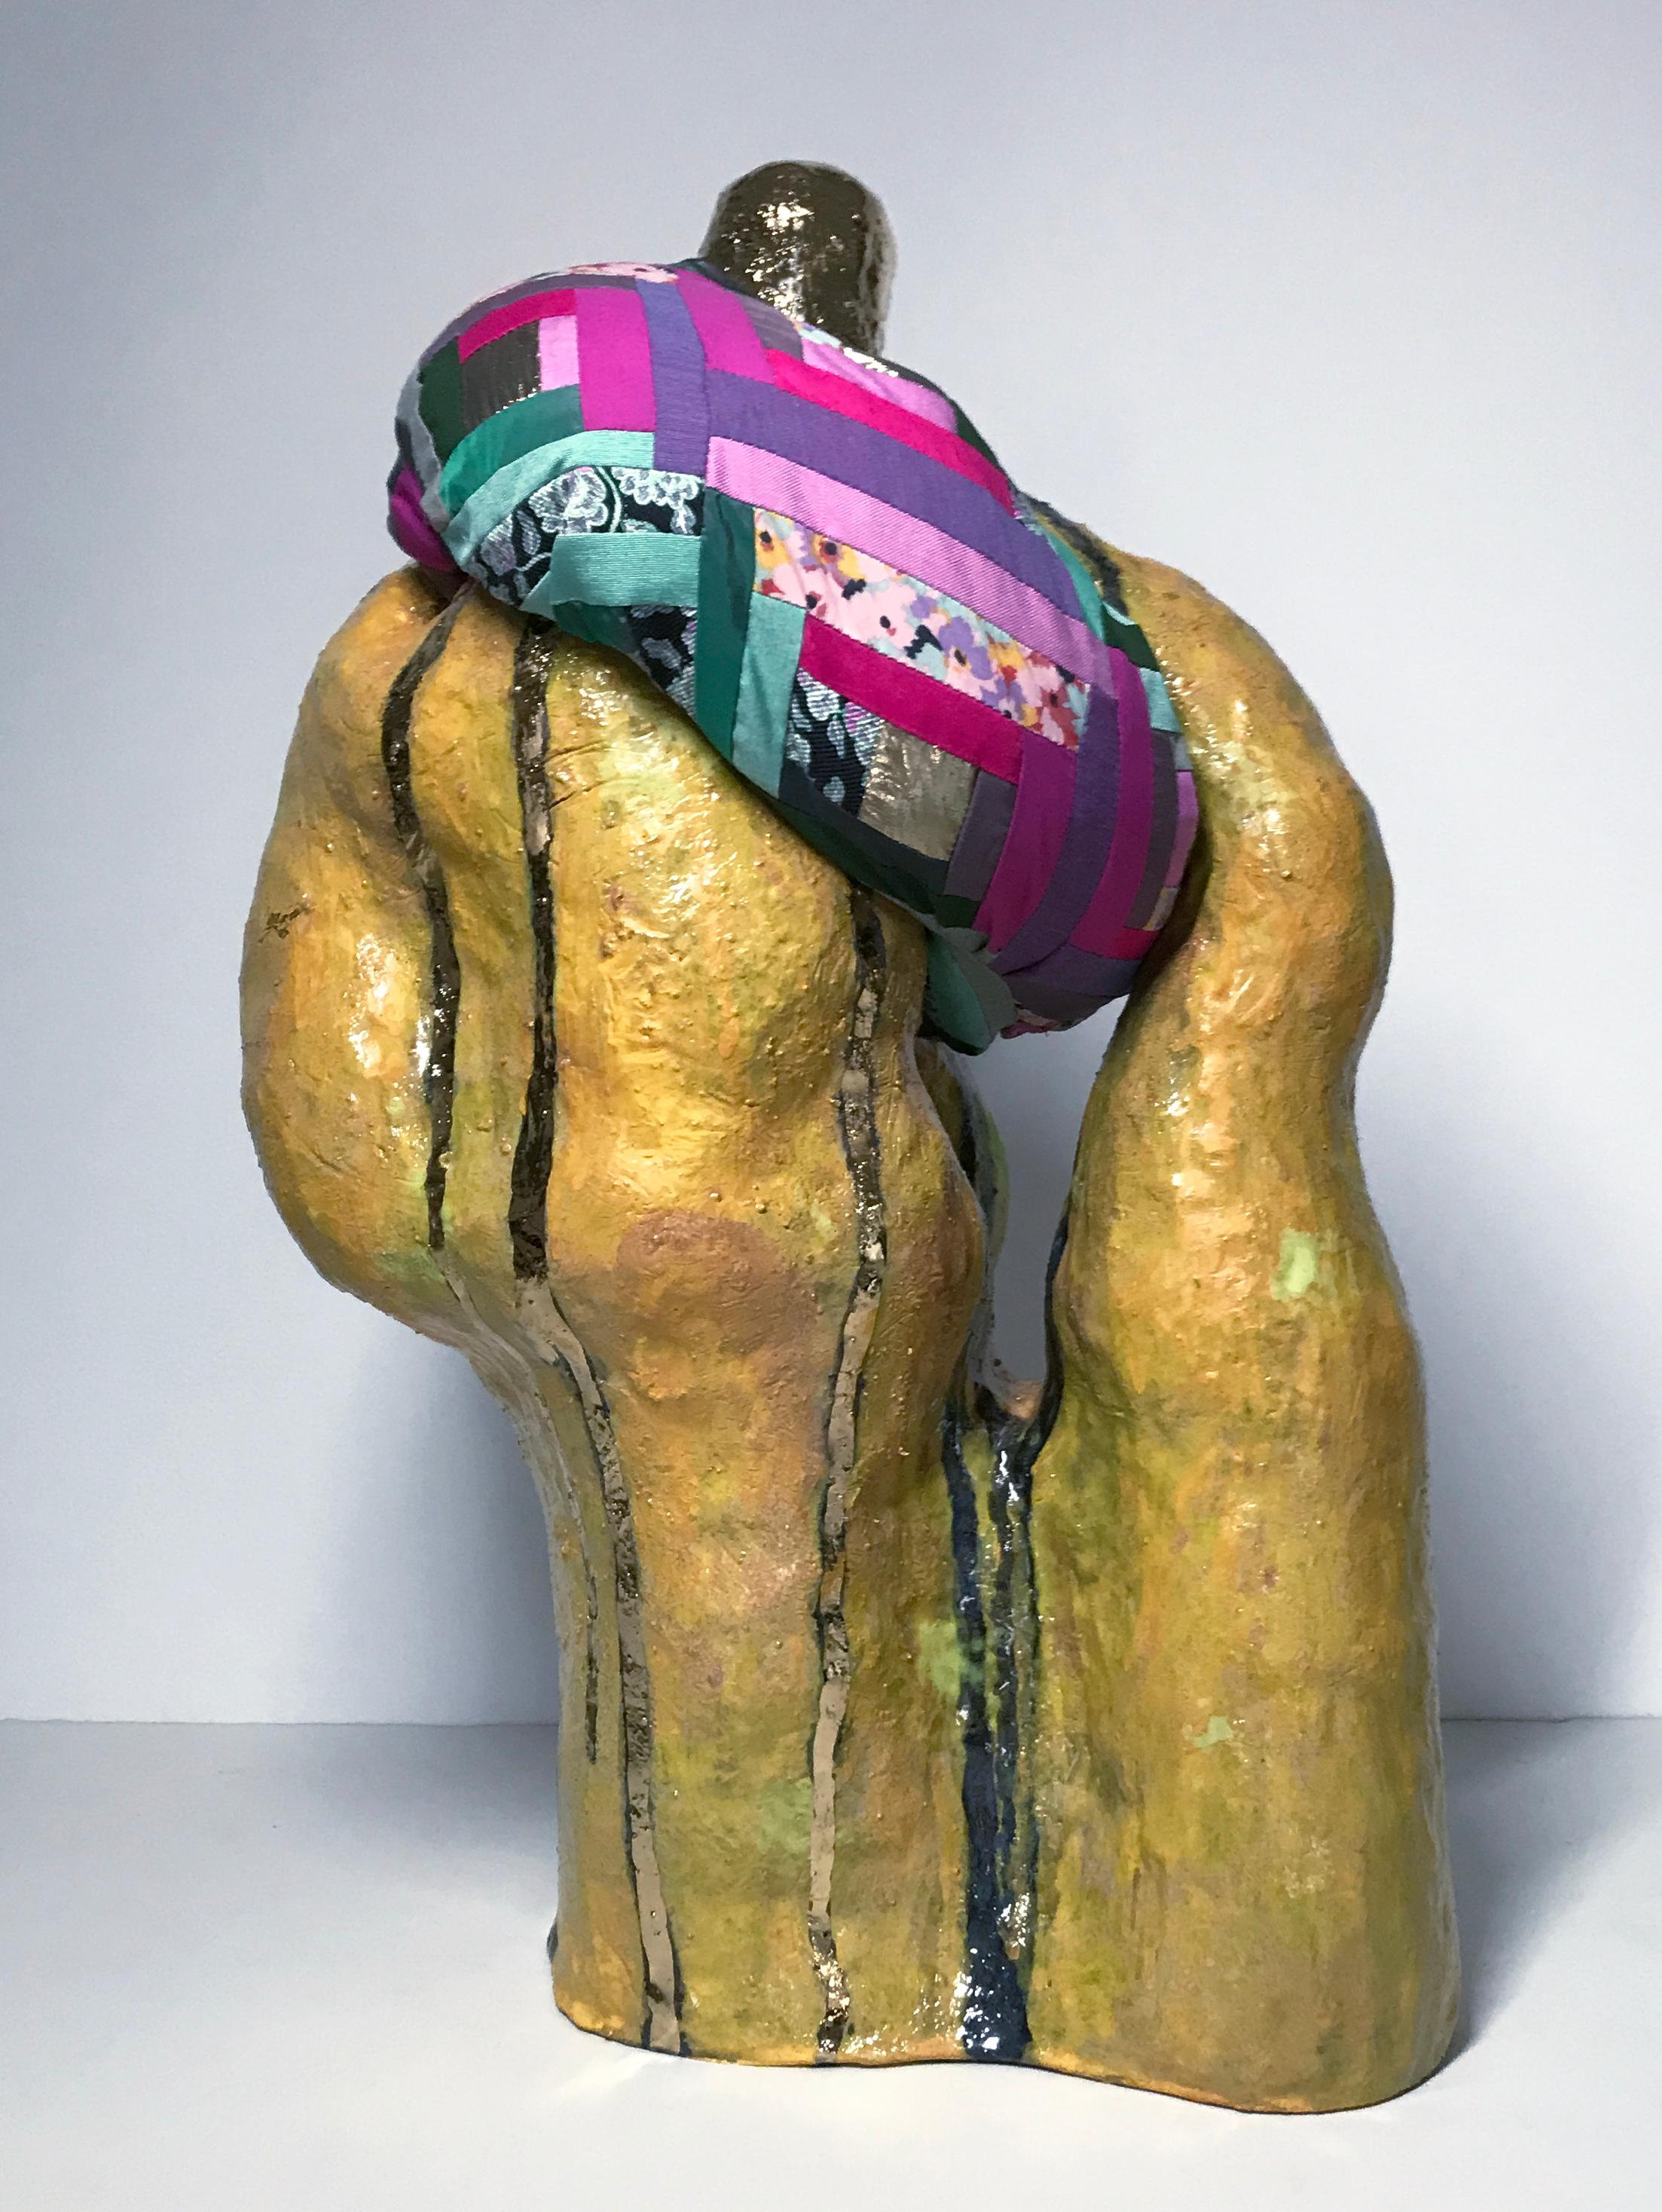 Ceramic and textile sculpture: 'No. 5' - Contemporary Mixed Media Art by Ak Jansen